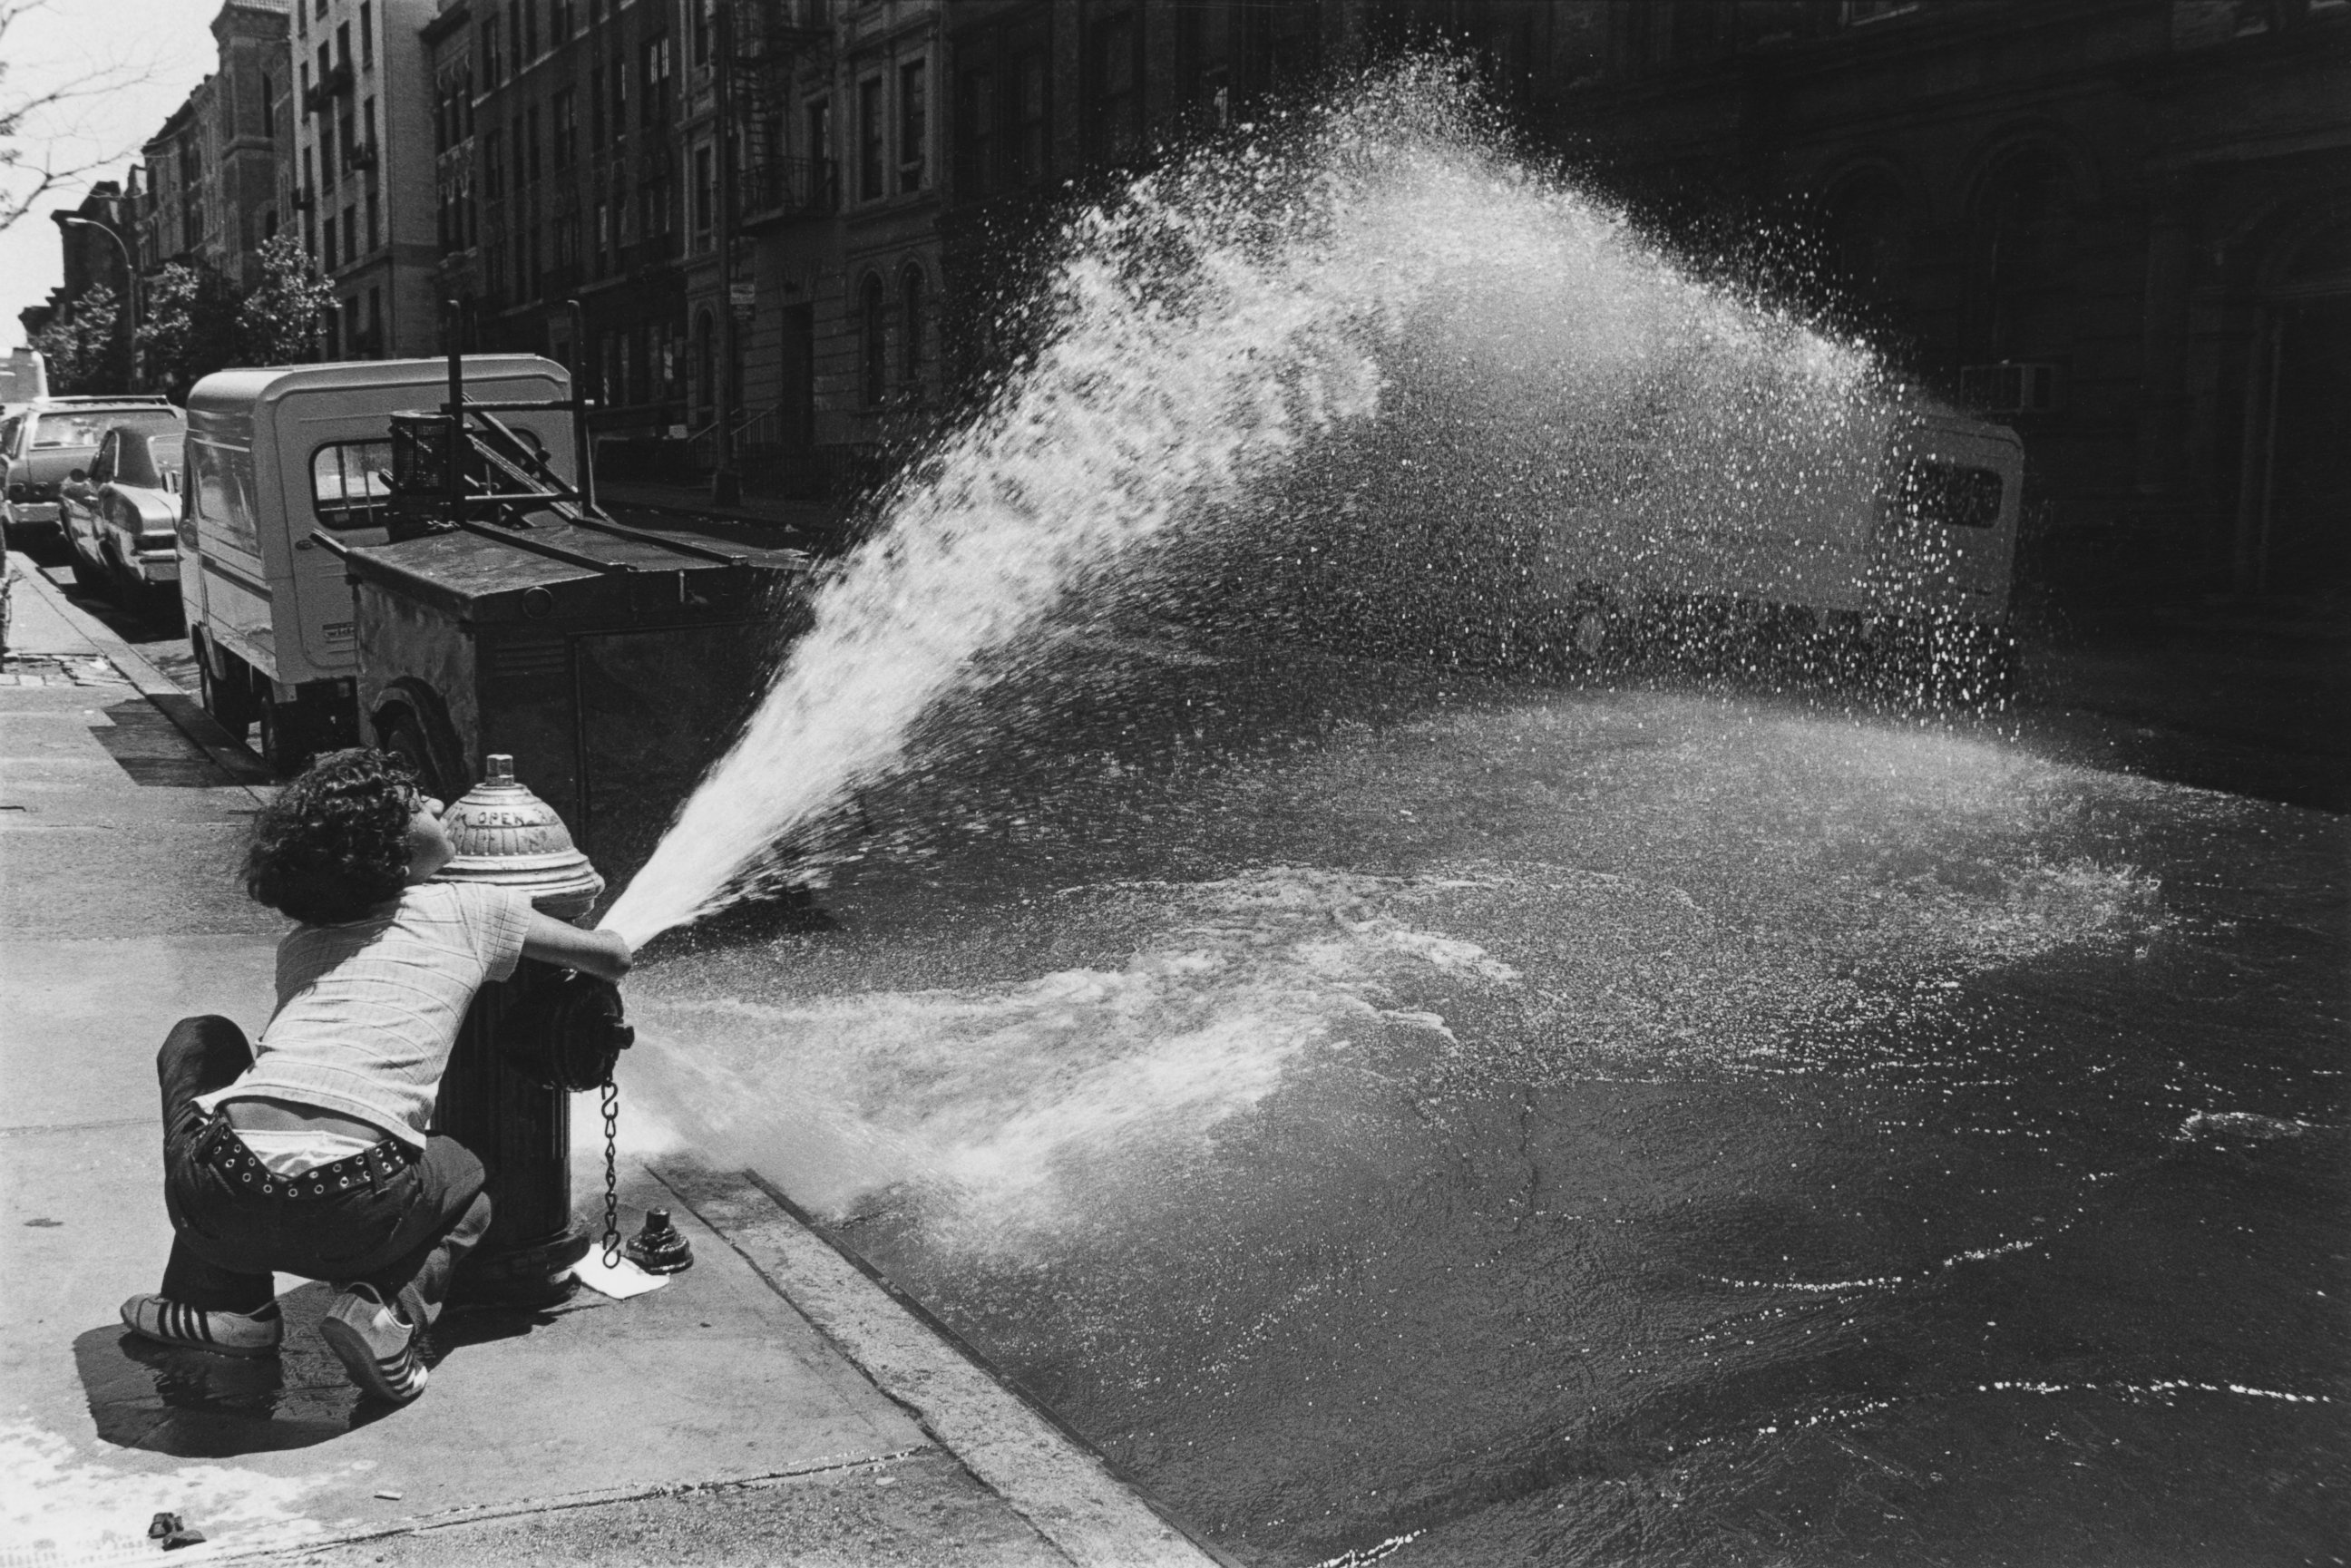 PHOTO: A boy grabs onto a fire hydrant spraying water onto a street in New York, June 12, 1976.